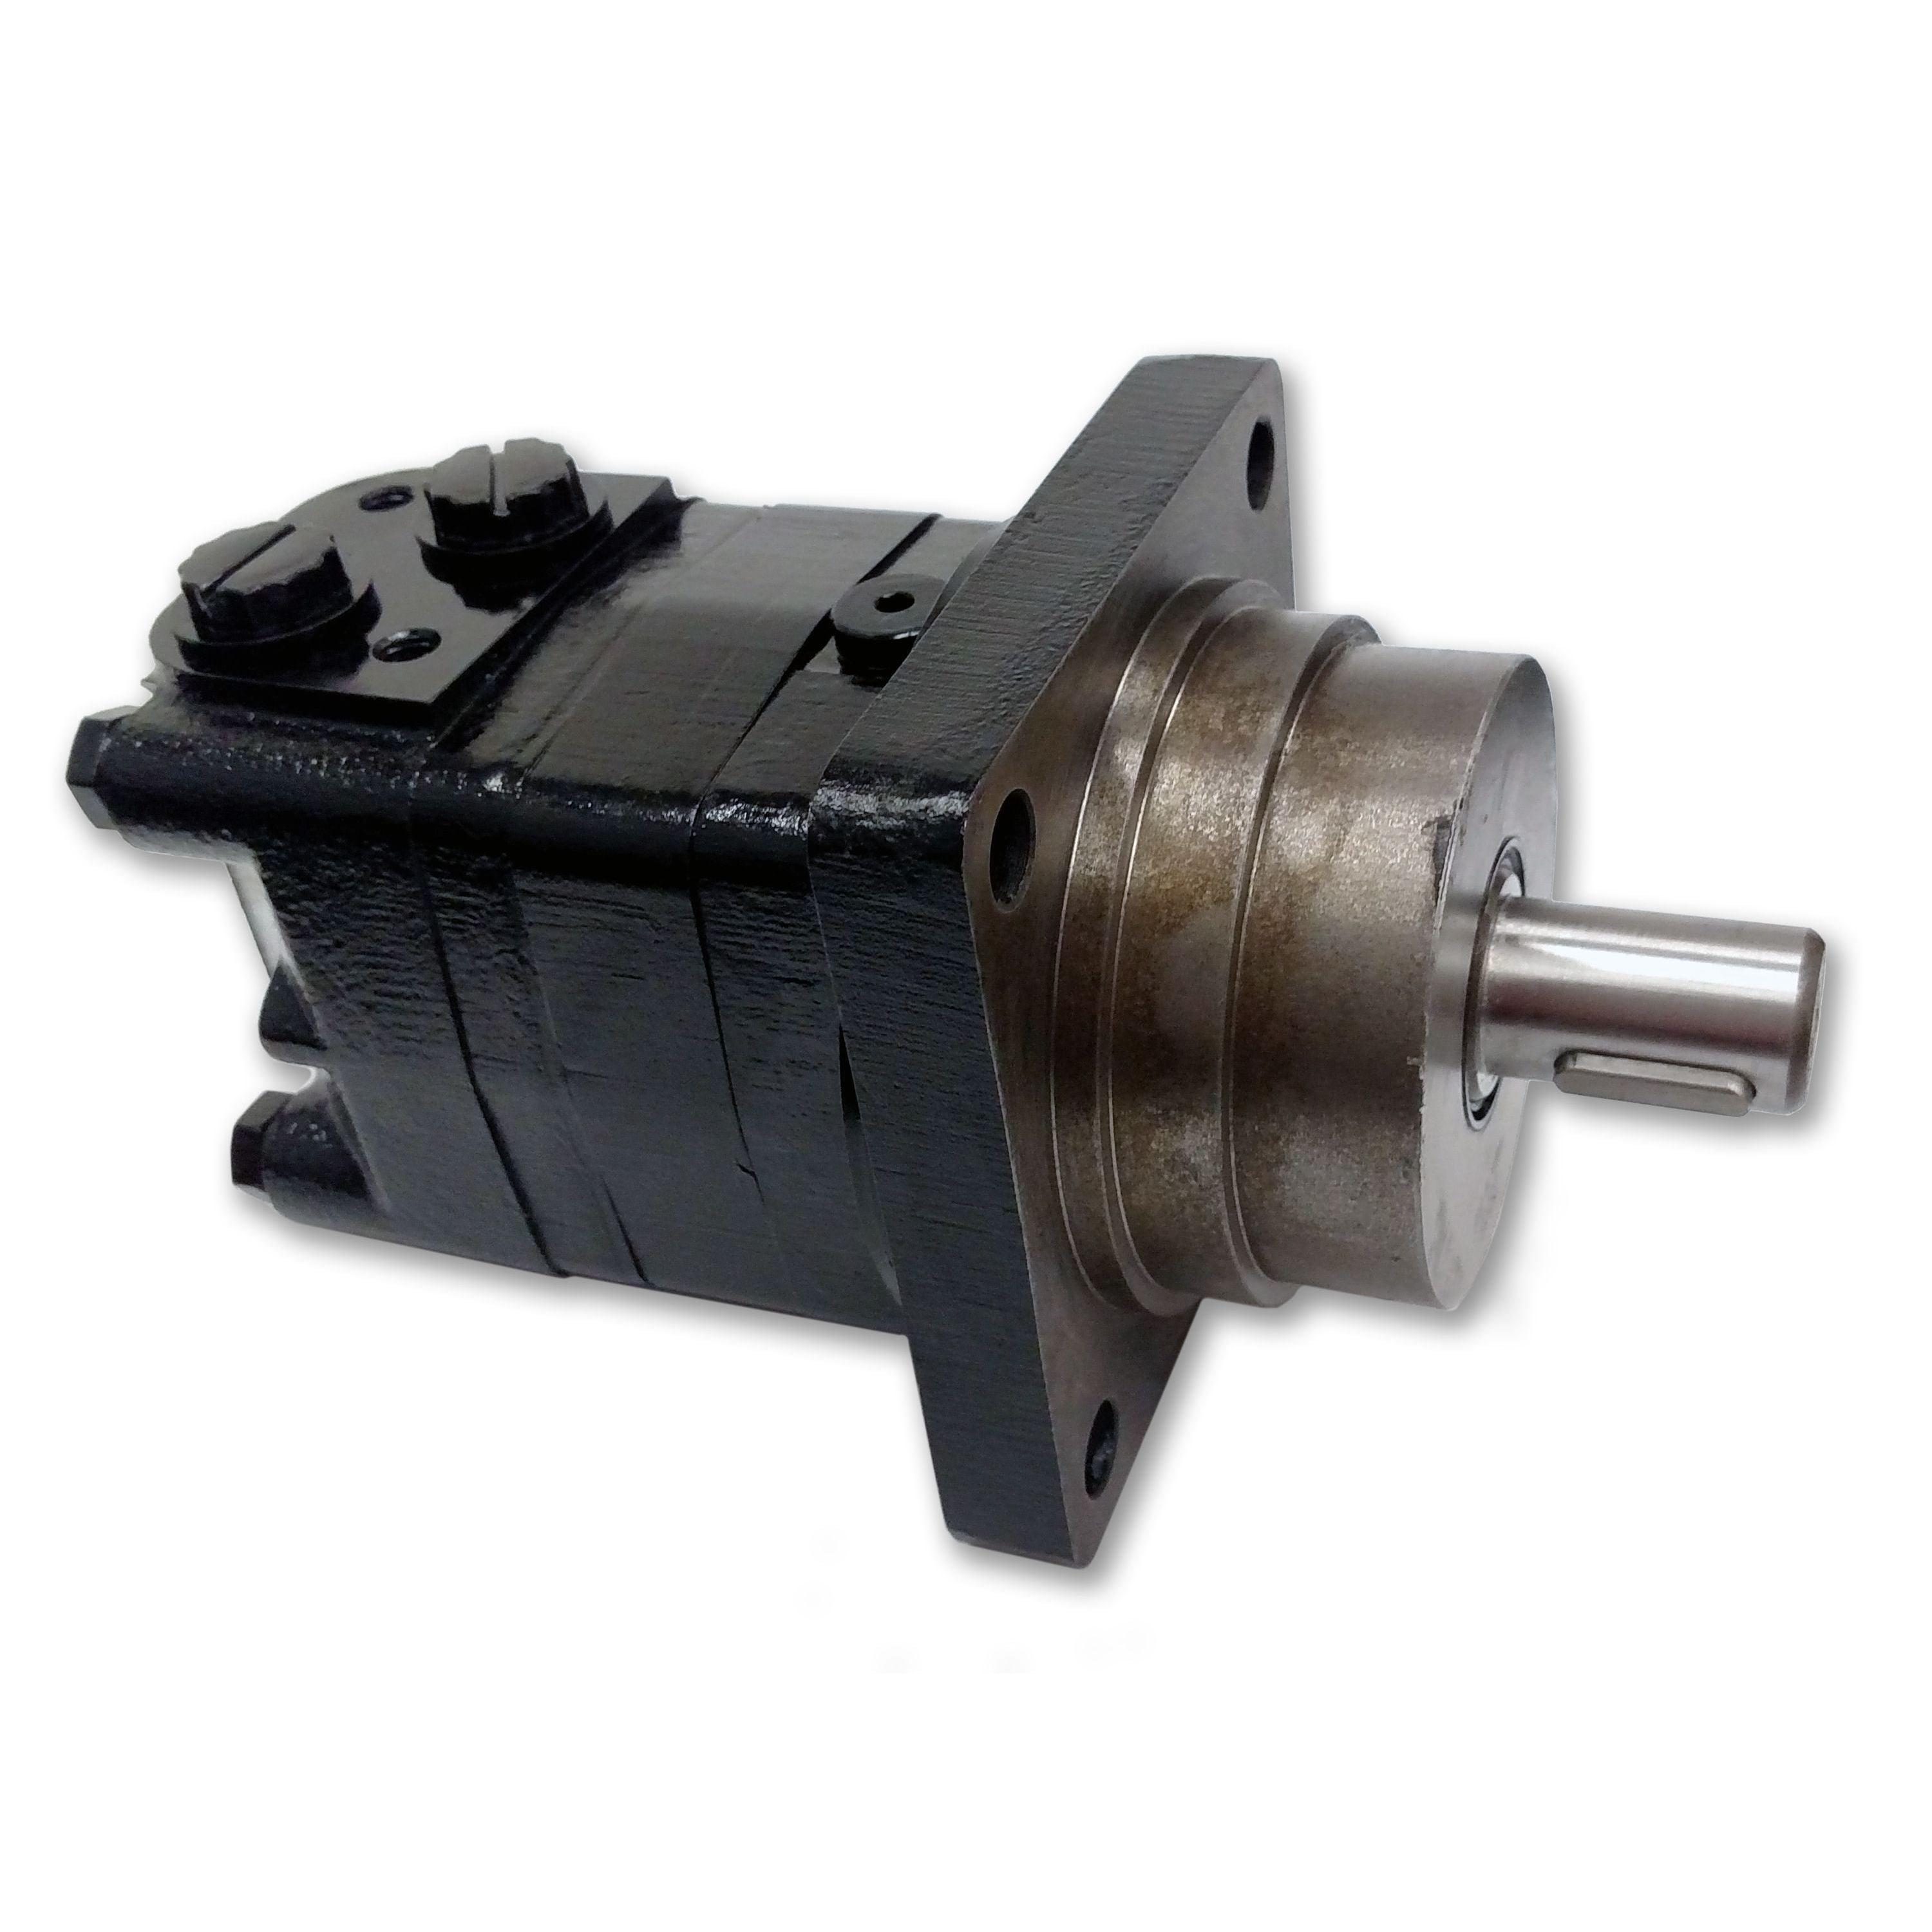 BMSY-400-WE-F-S : Dynamic LSHT Motor, 394cc, 185RPM, 7786in-lb, 2320psi Differential, 19.81GPM, Wheel Mount, 14-Tooth, 12/24 Pitch Shaft, Side Ported, #10 SAE (5/8")